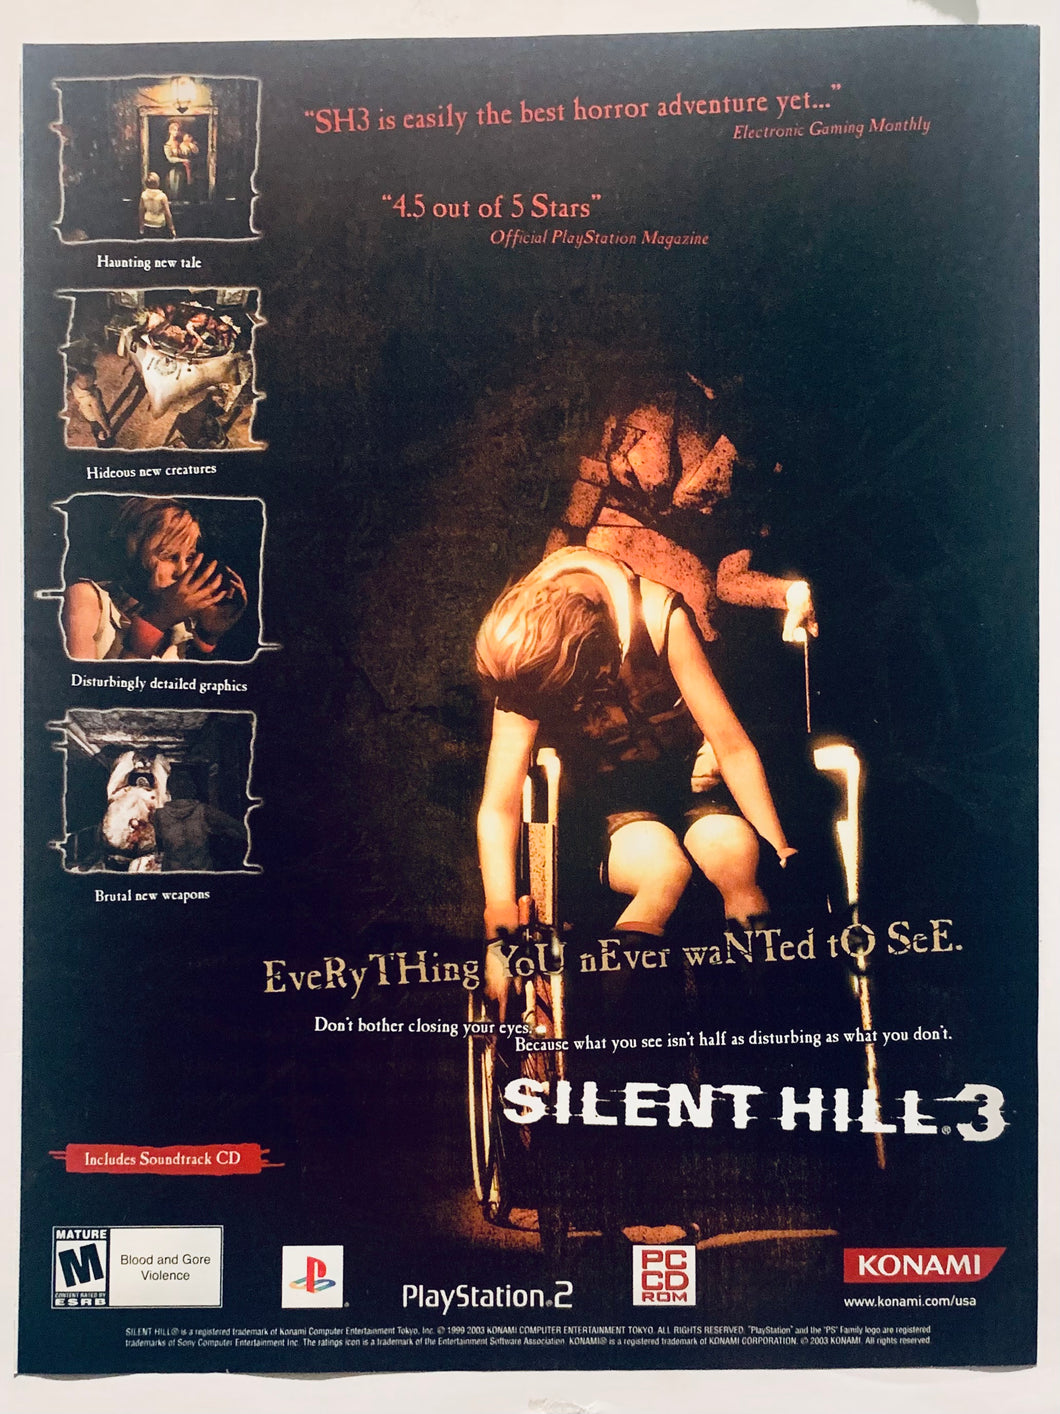 Silent Hill 3 - PS2 - Original Vintage Advertisement - Print Ads - Laminated A4 Poster